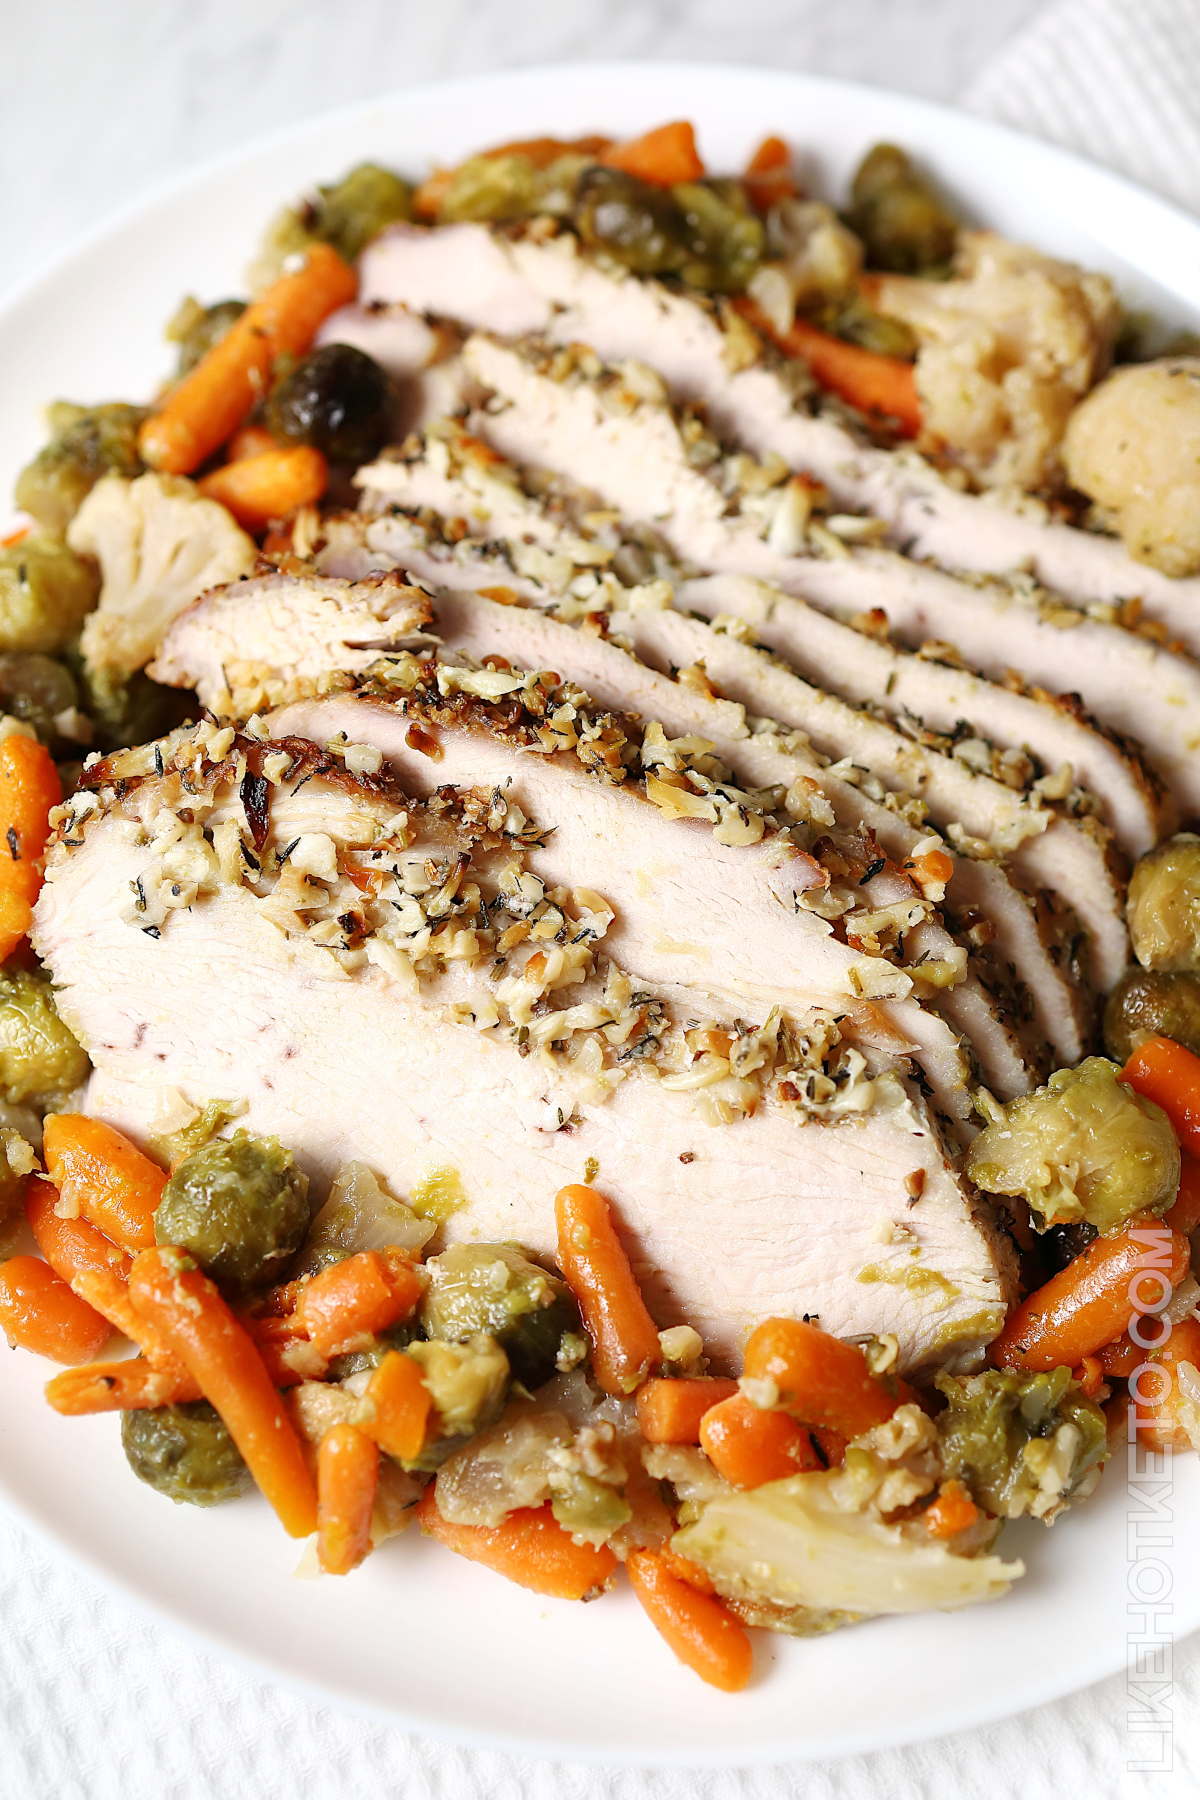 Roasted turkey breast, baby carrots, Brussel sprouts and cauliflower florets on a serving dish.